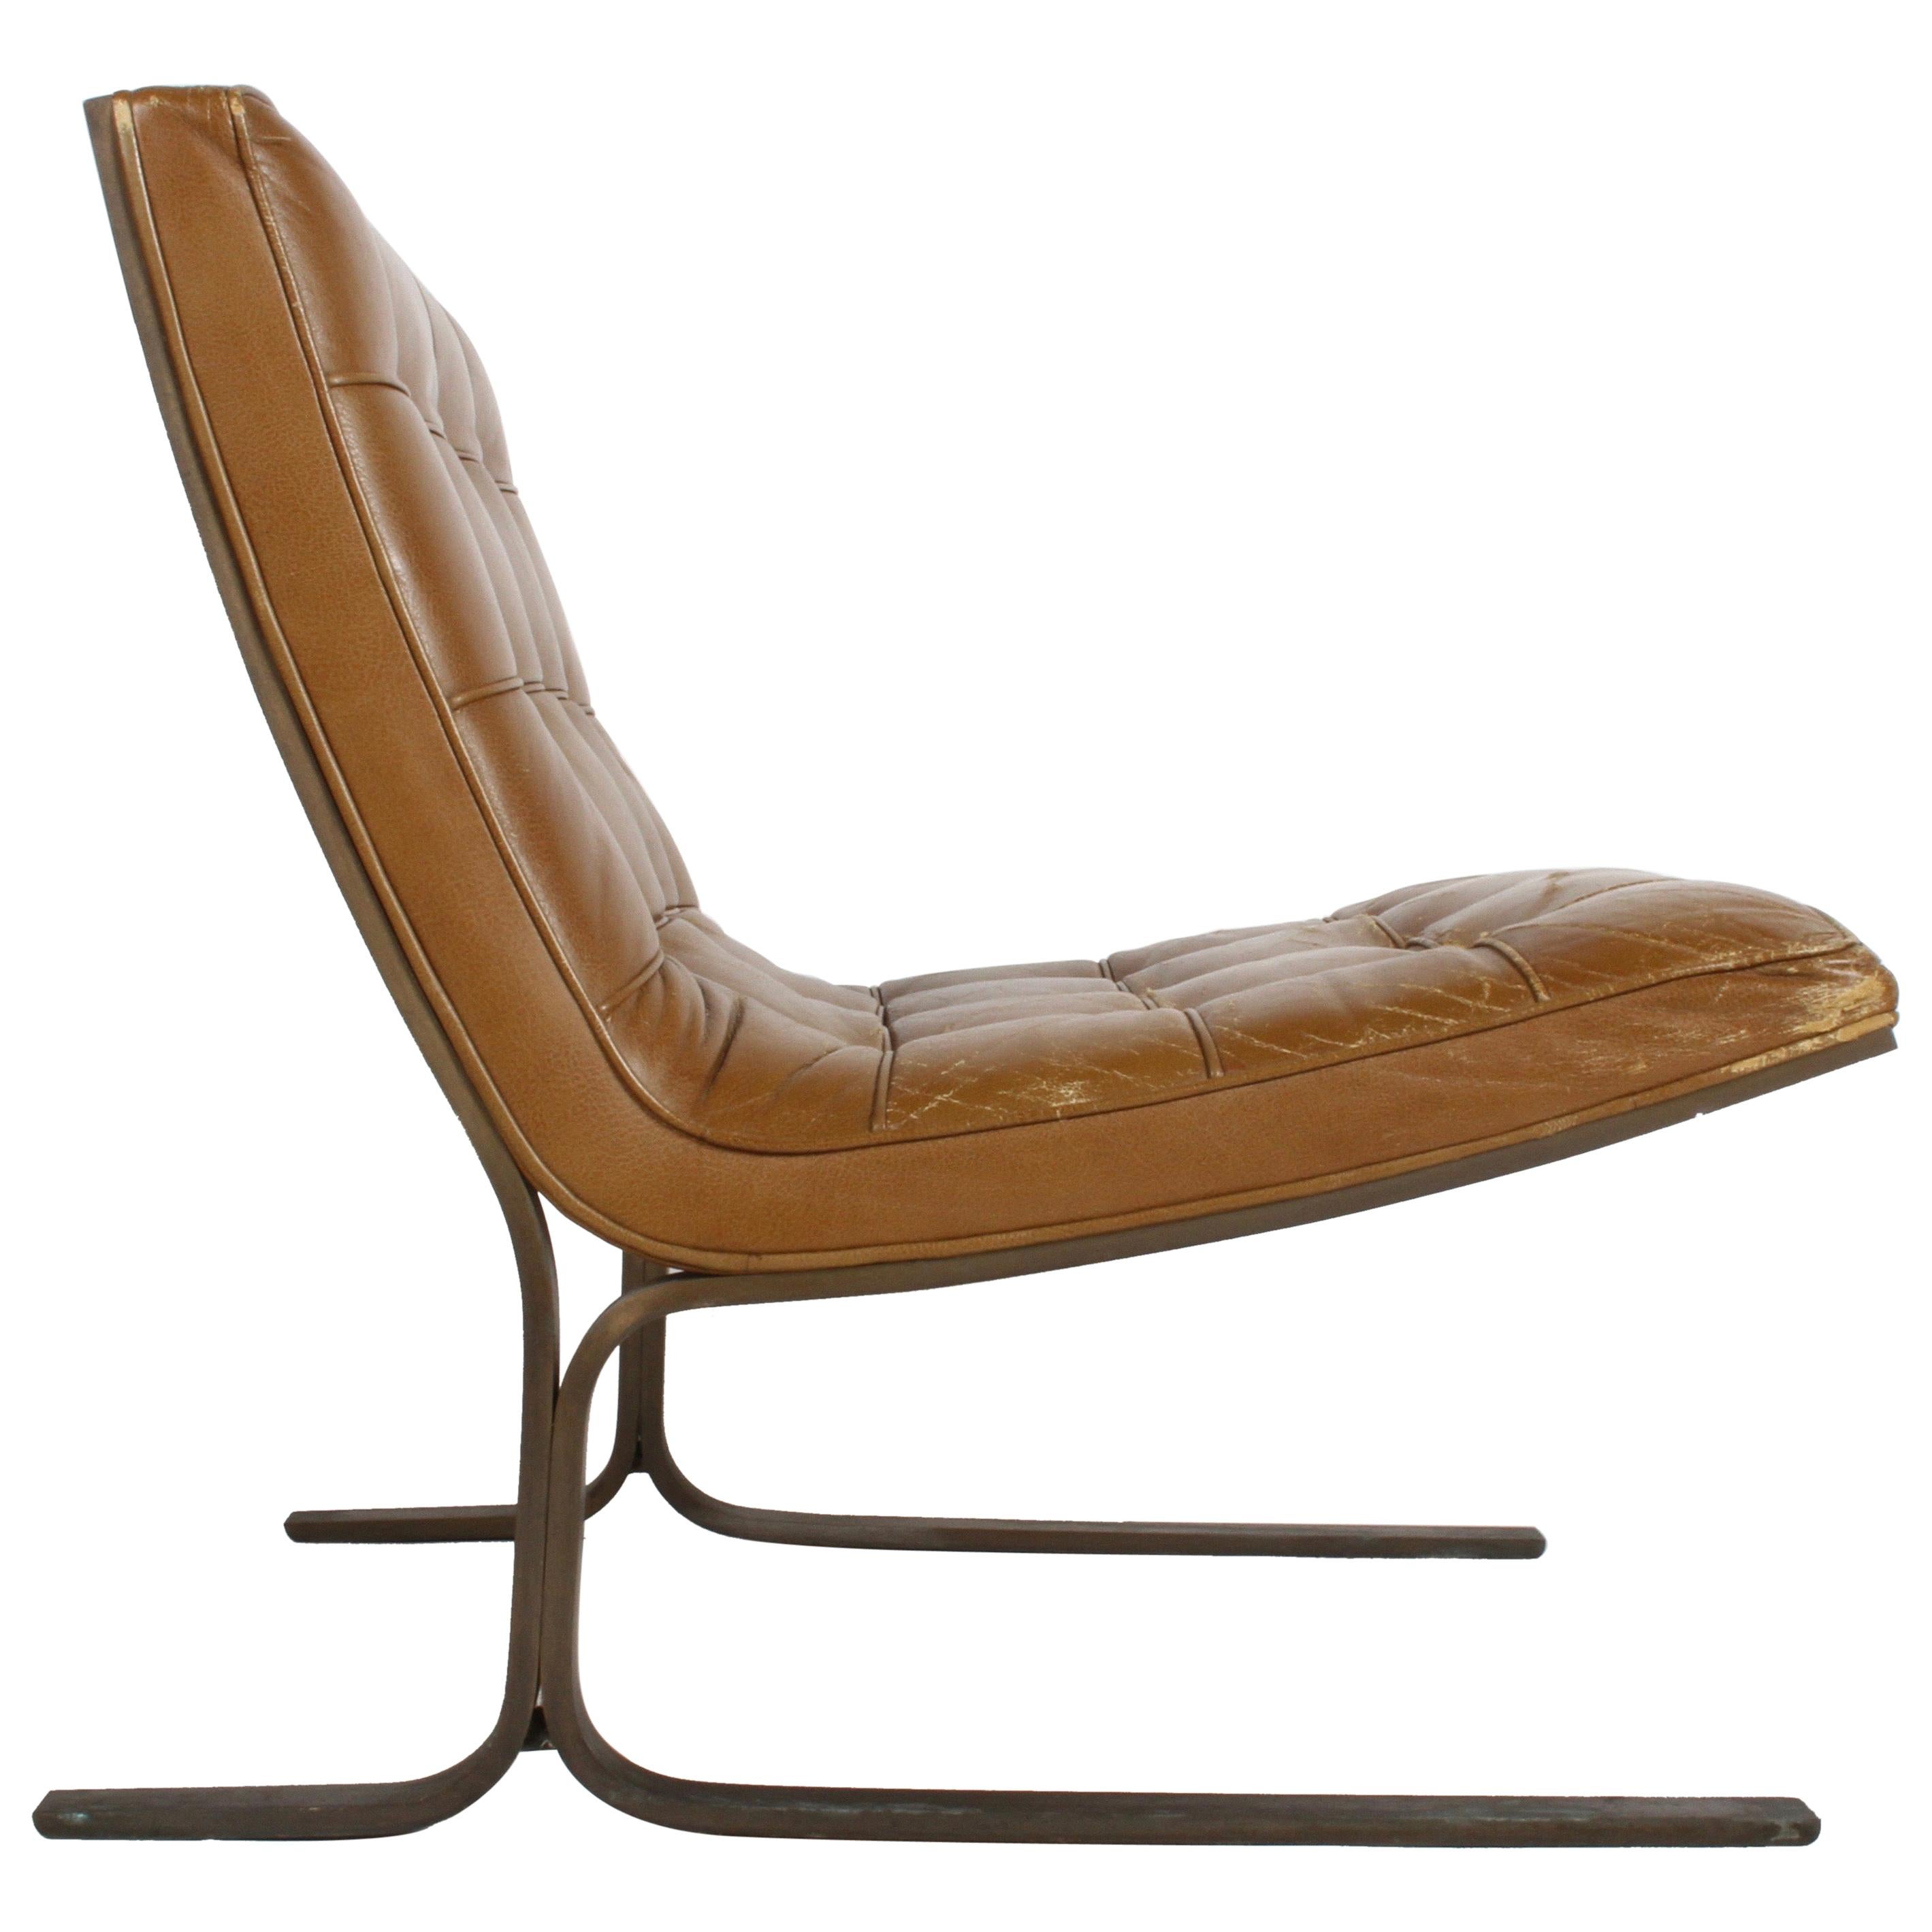 Nicos Zographos Cantilever Bronze Base Lounge Chair CH28 in Carmel Leather For Sale